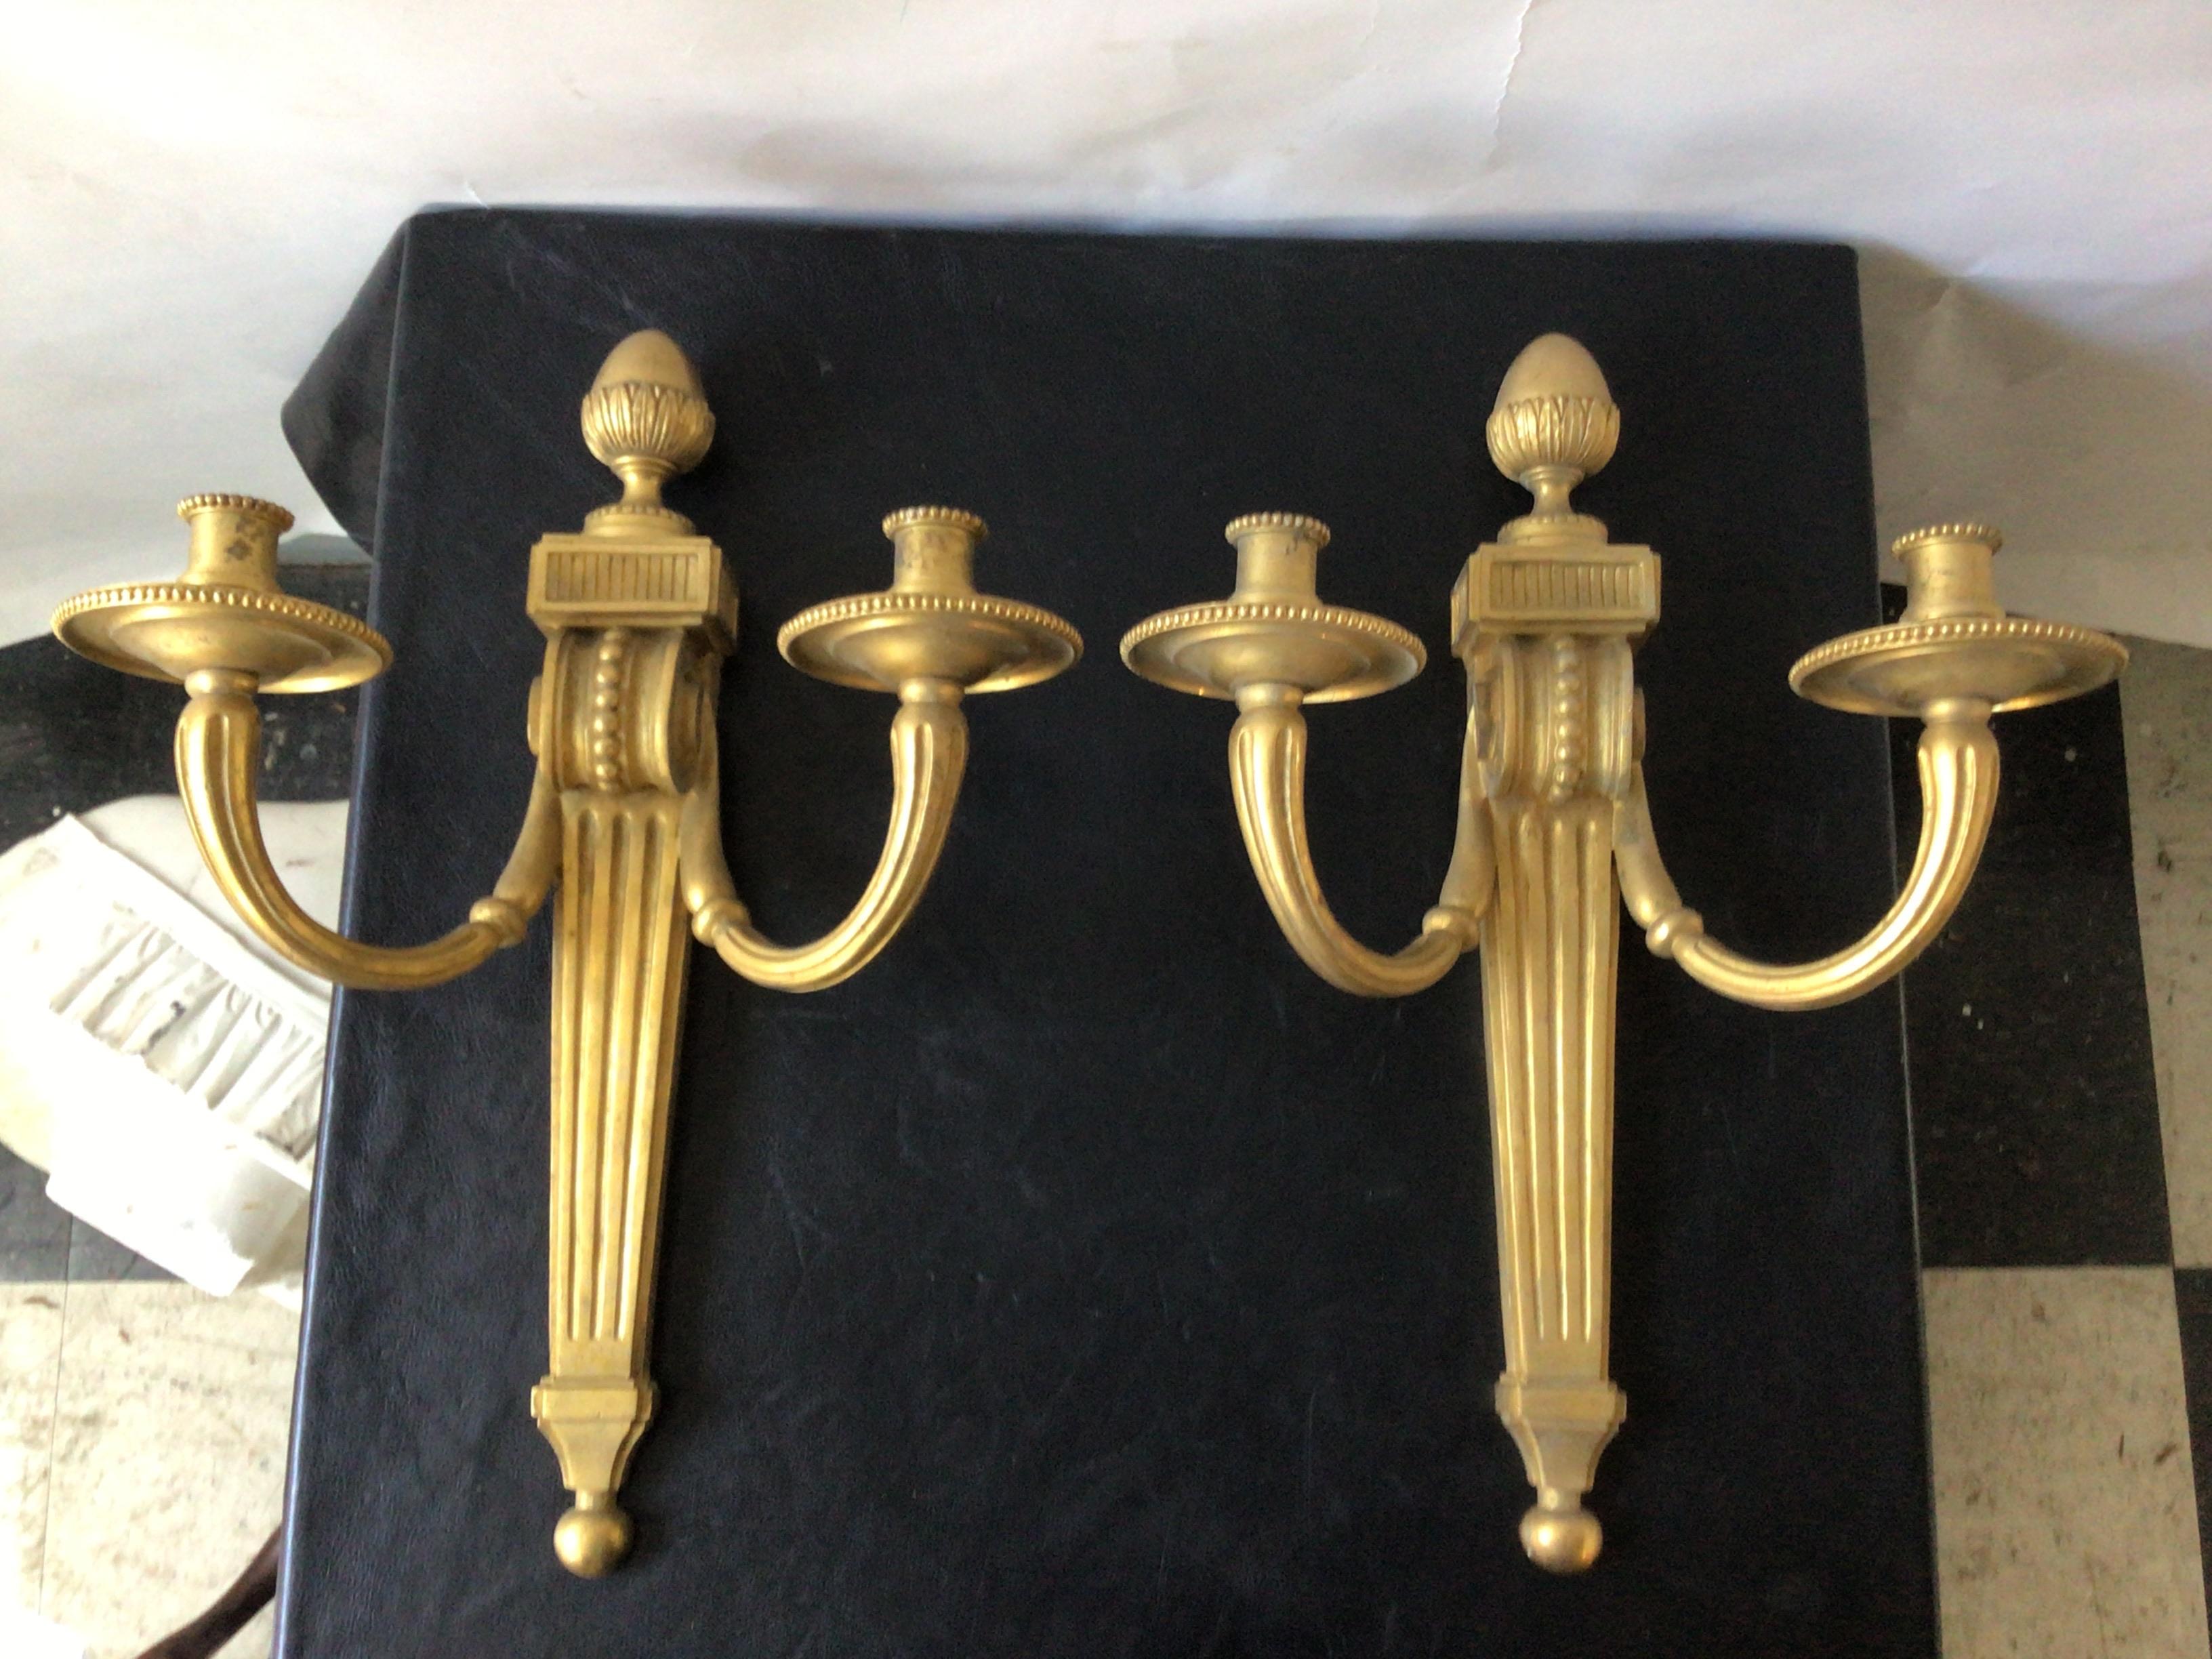 1880s French gilt bronze classical sconces. Needs to be wired. Measure: 19” High.